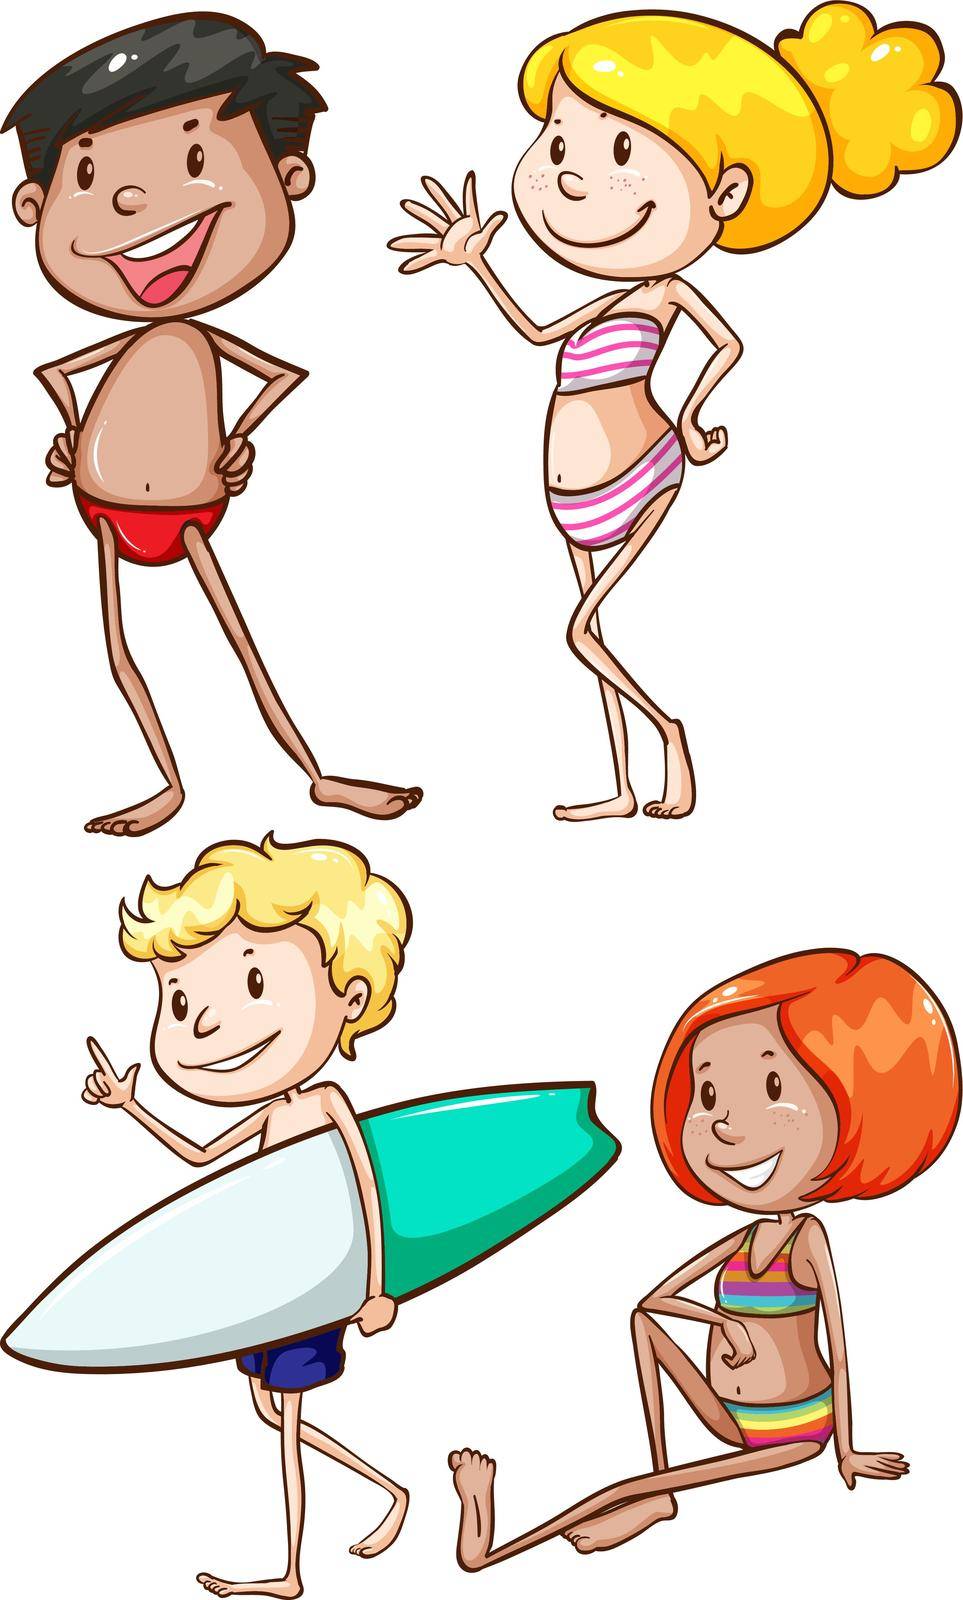 Illustration of the plain drawings of the people at the beach on a white background